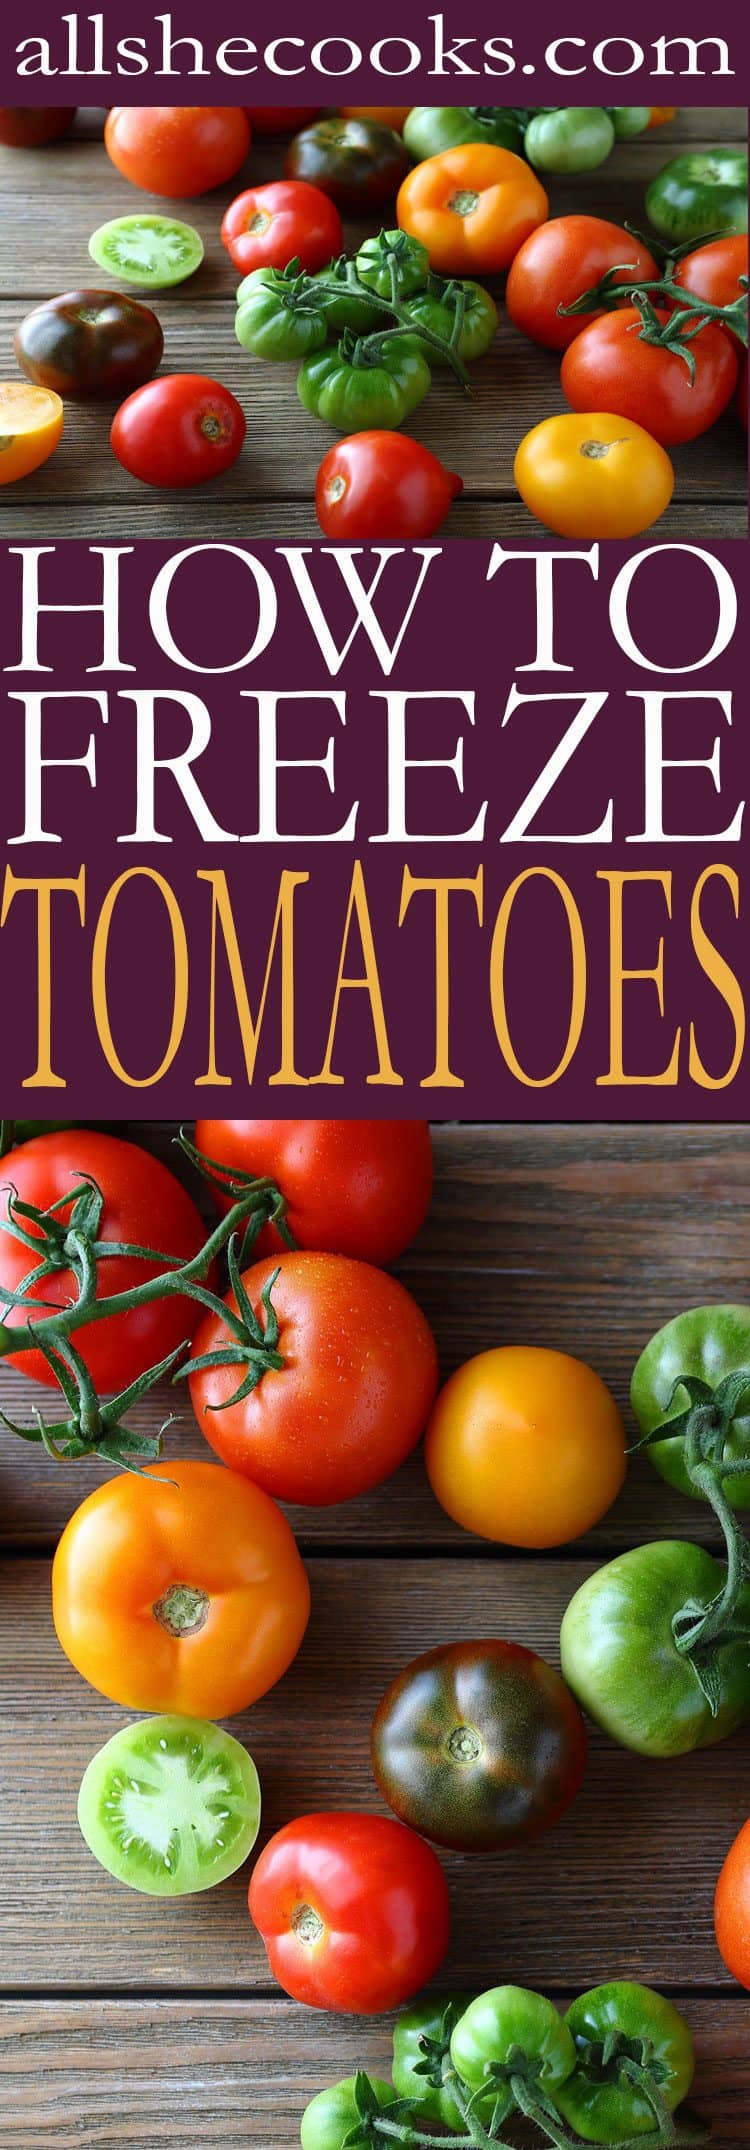 Preserving tomatoes is one of the best ways to keep eating fresh vegetables all year long. Learn how to freeze tomatoes and enjoy the food you eat.